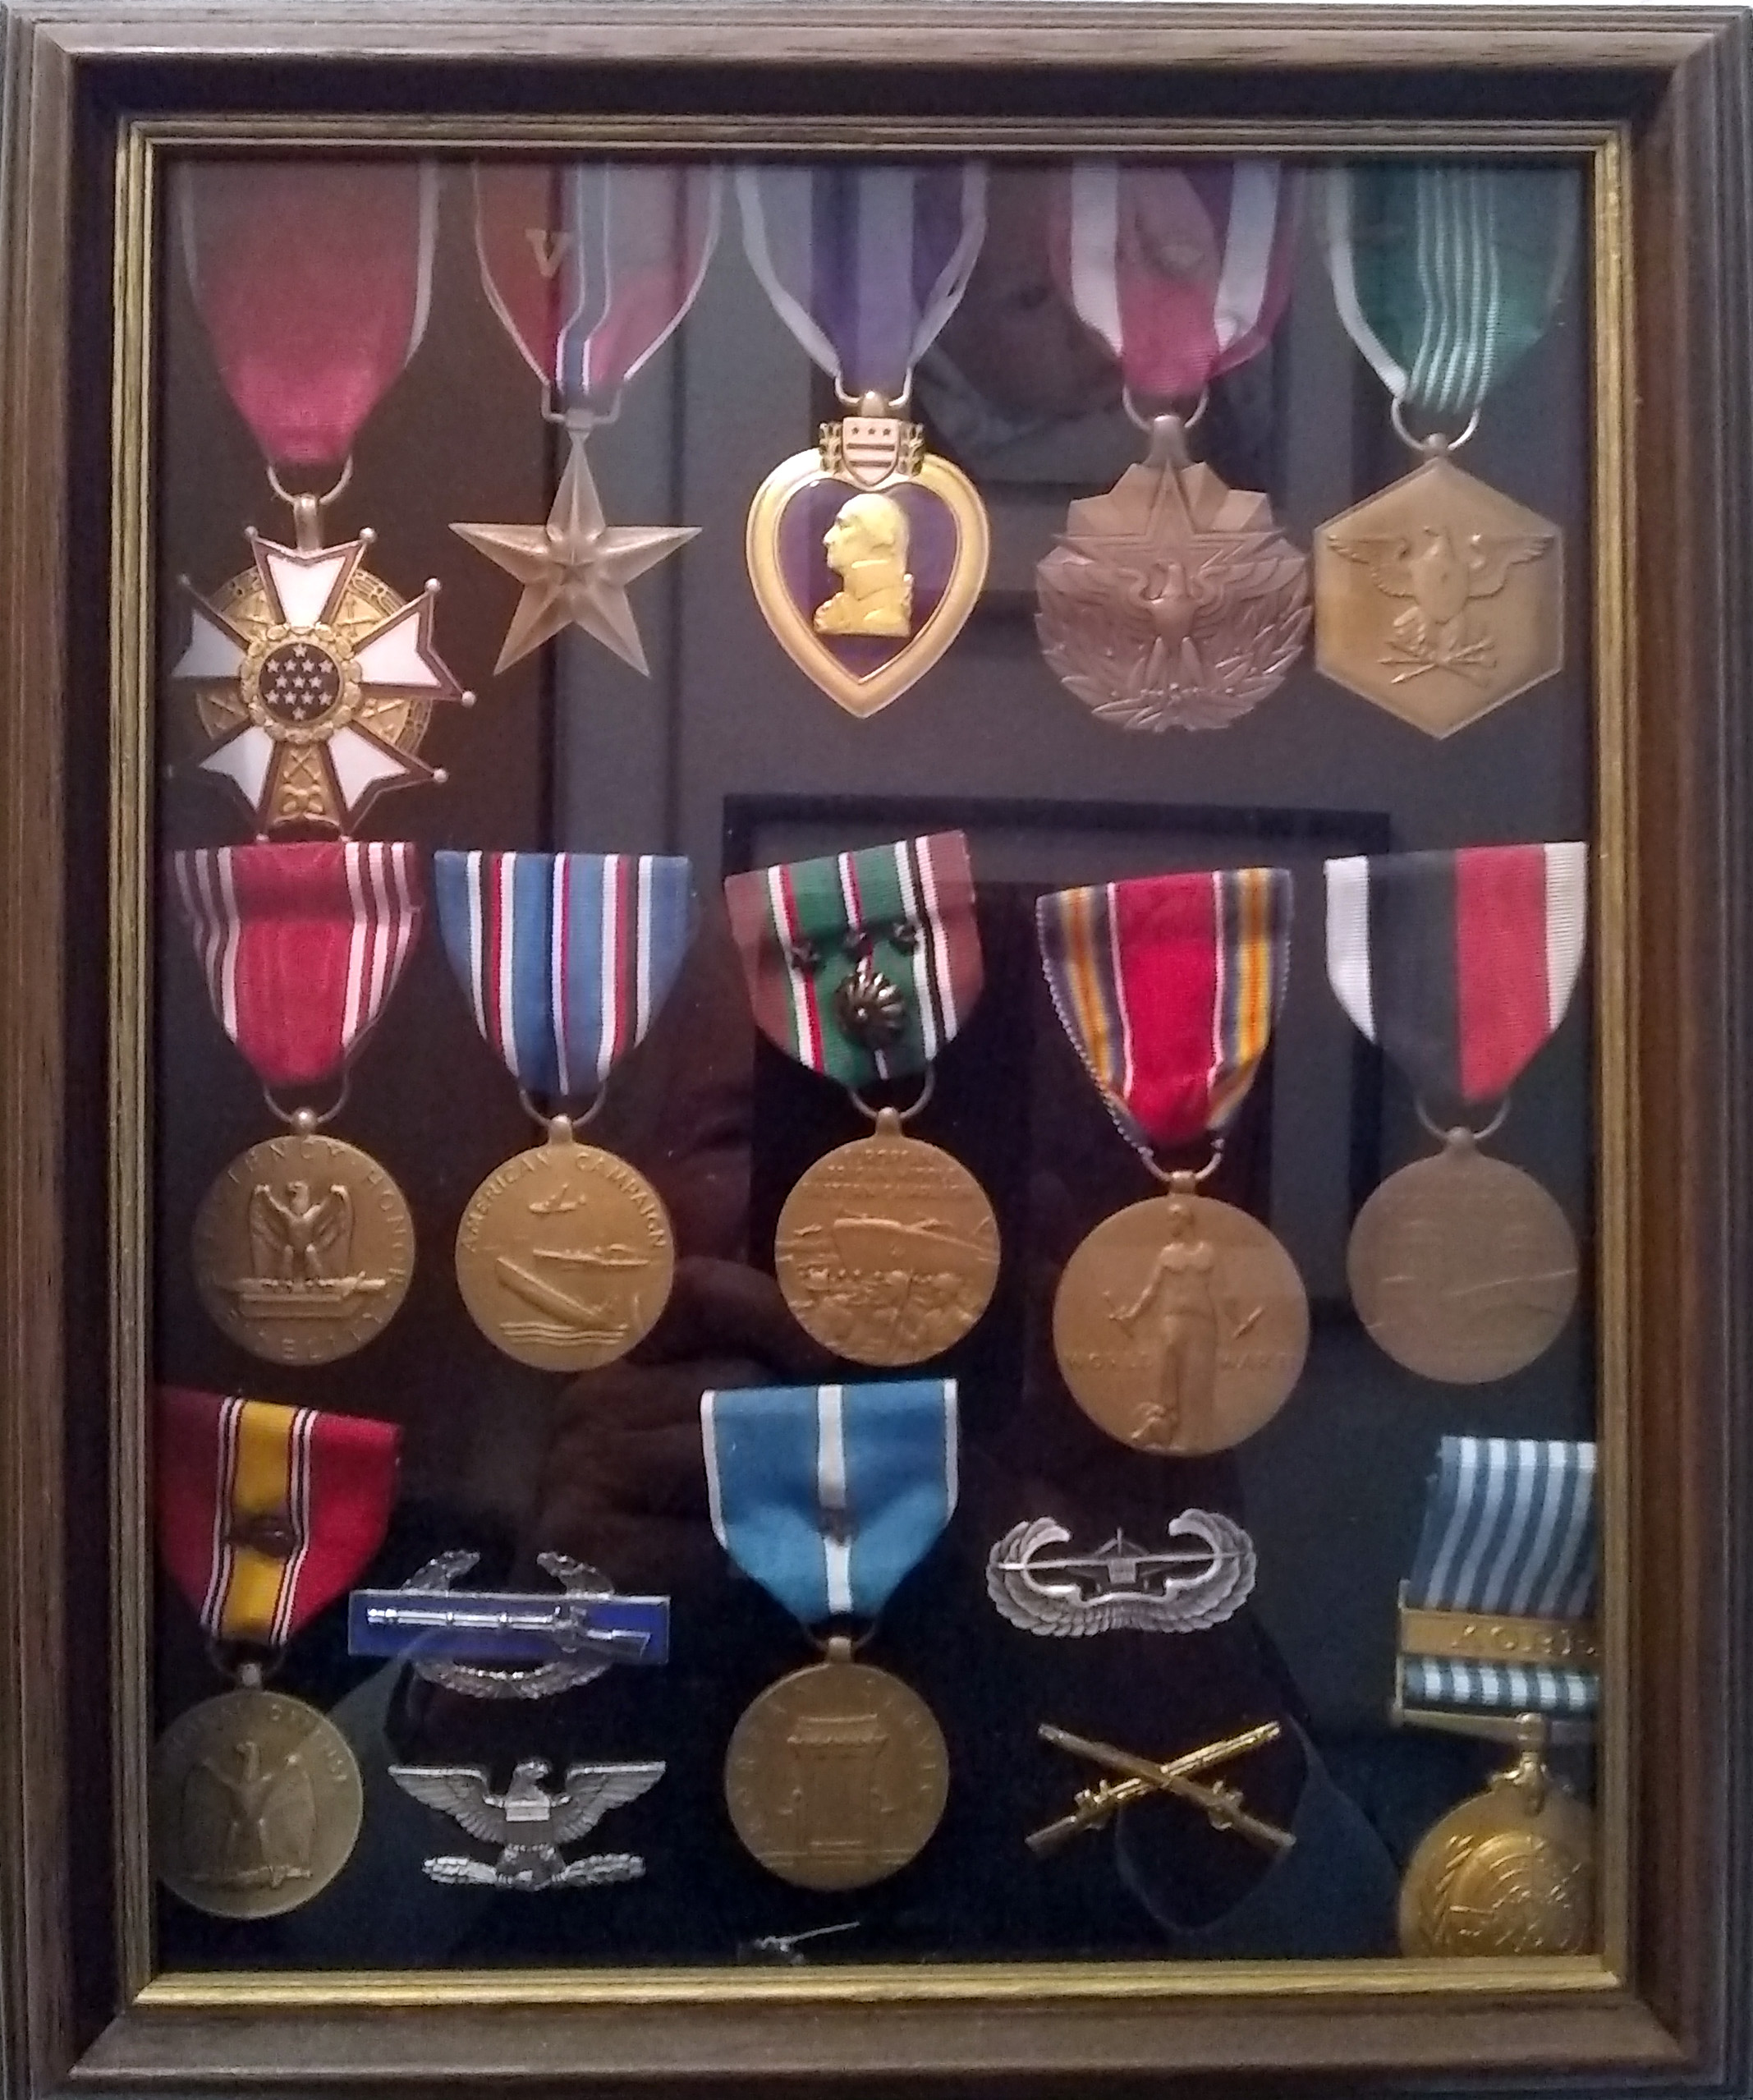 Charles Ives - Army medals and insignia